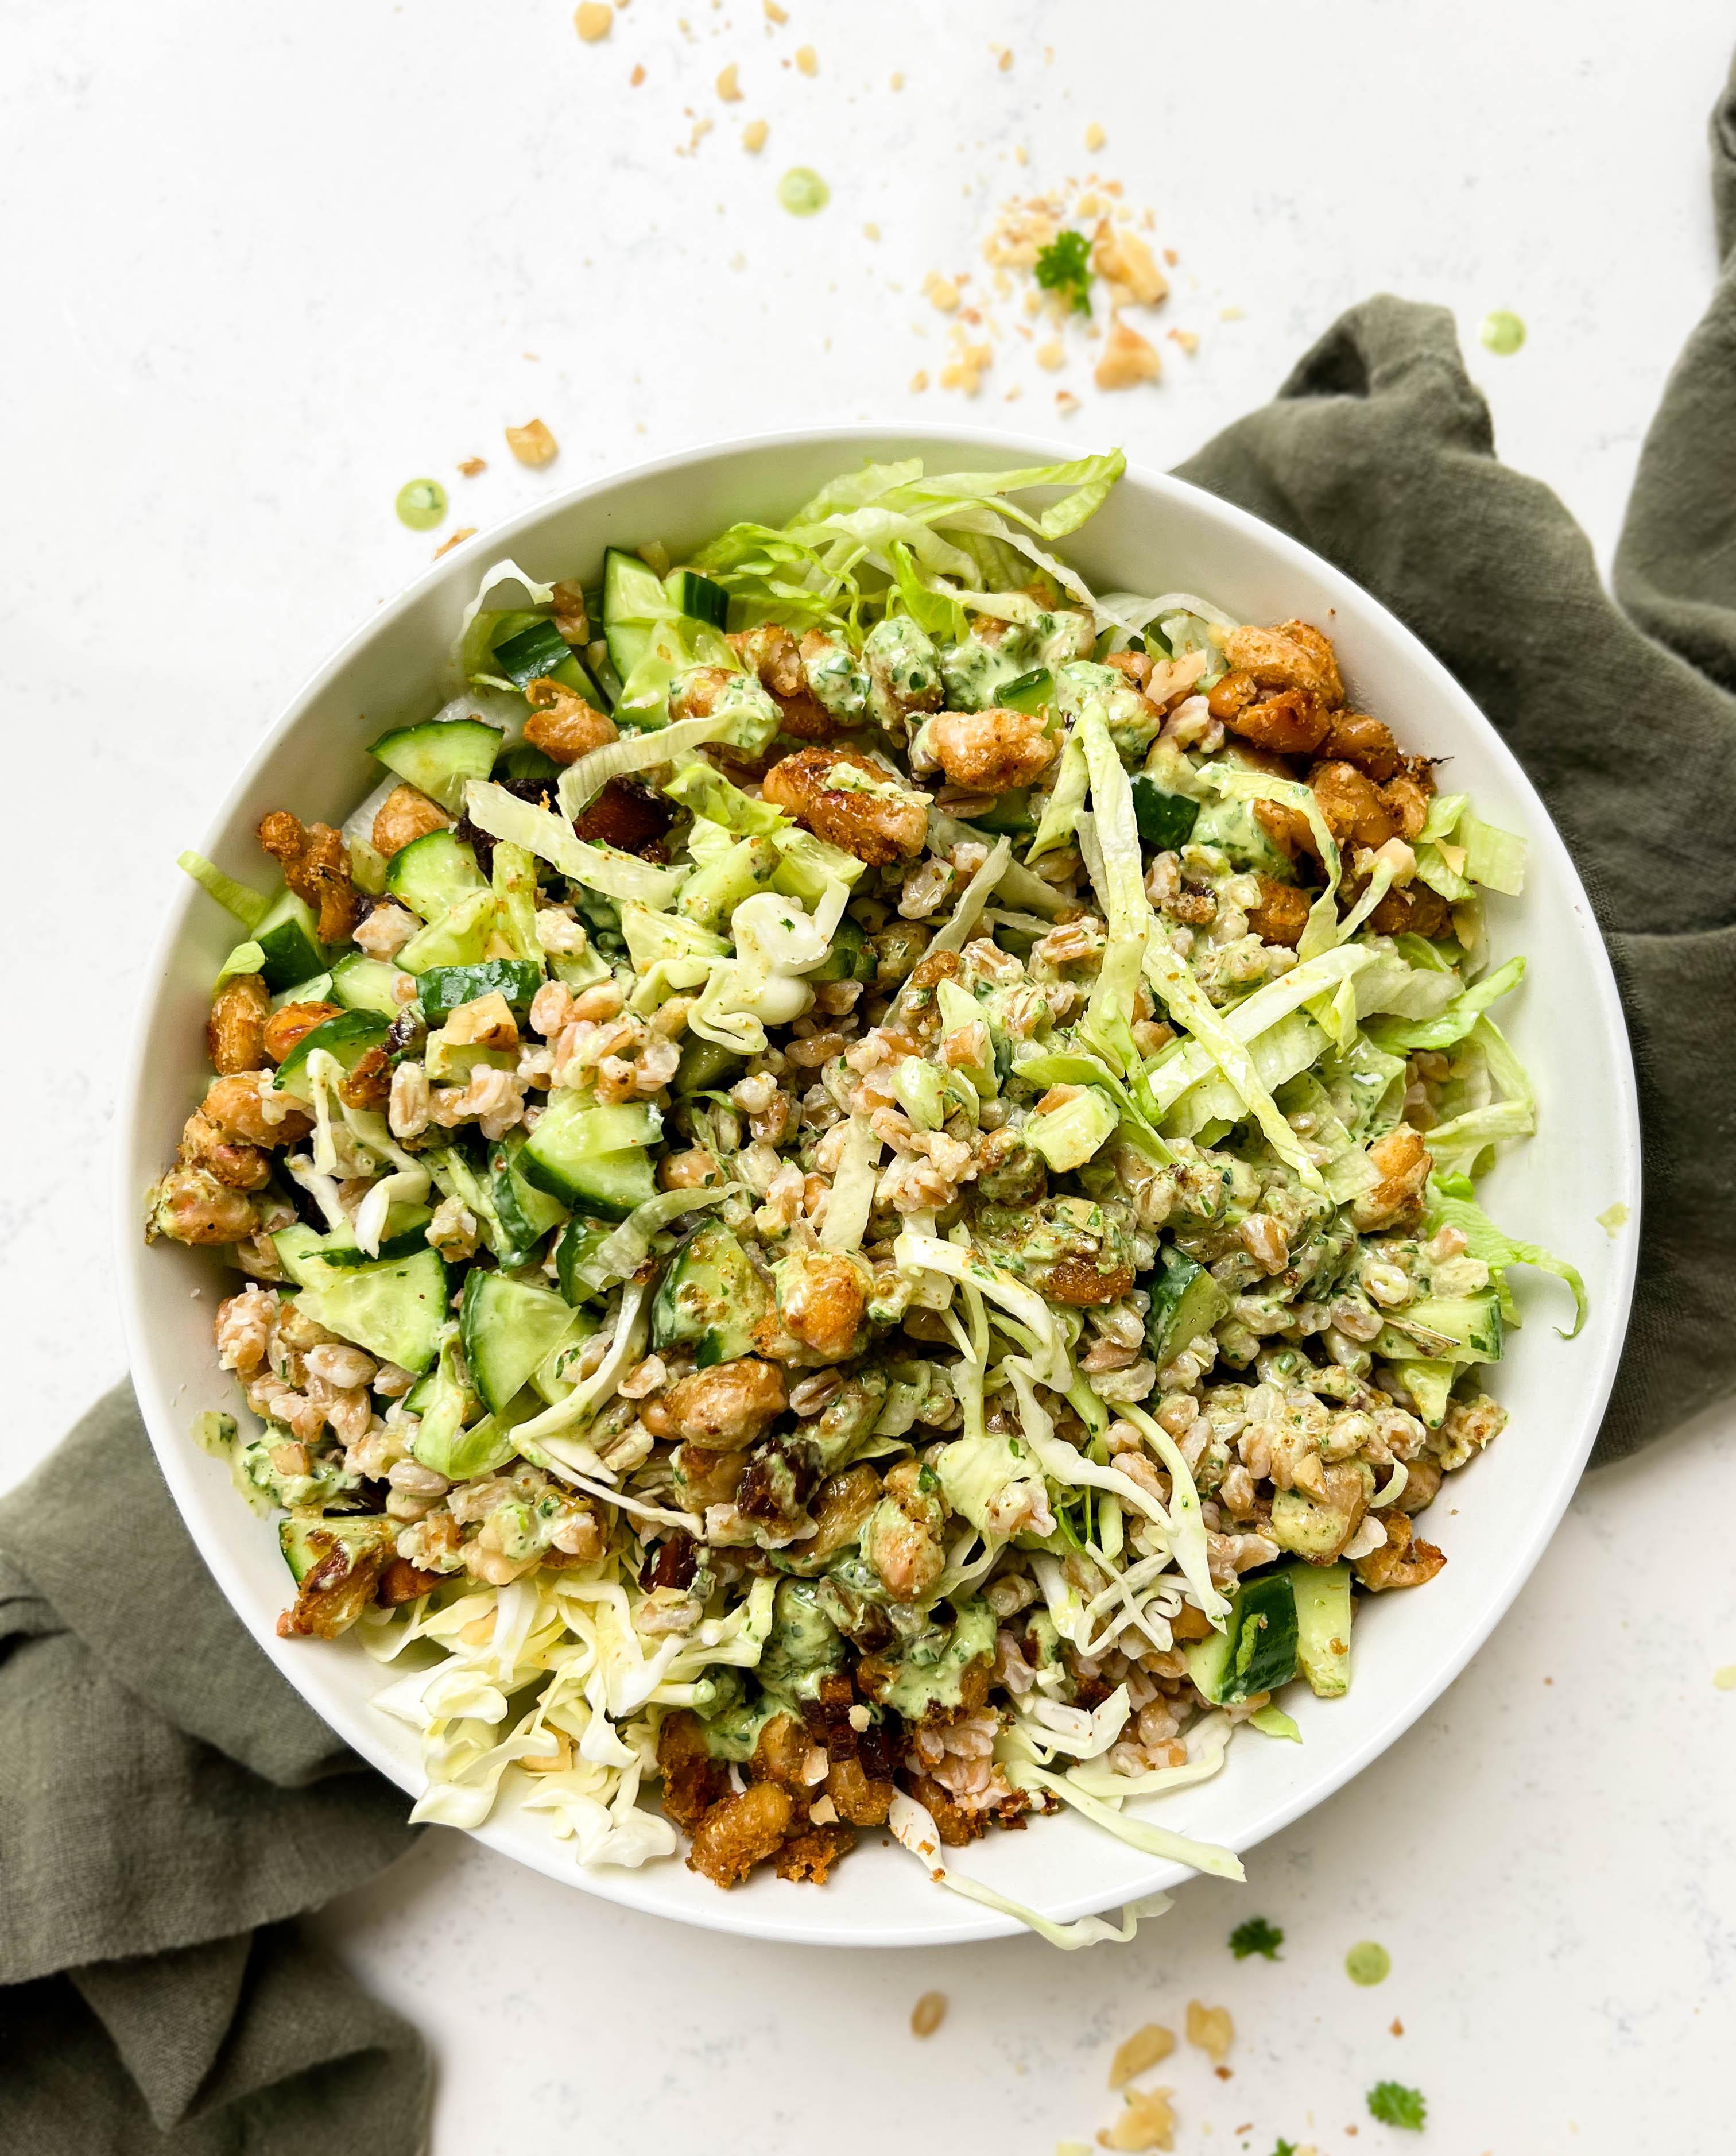 crunchy green cabbage salad with beans and farro next to parsley tahini dressing